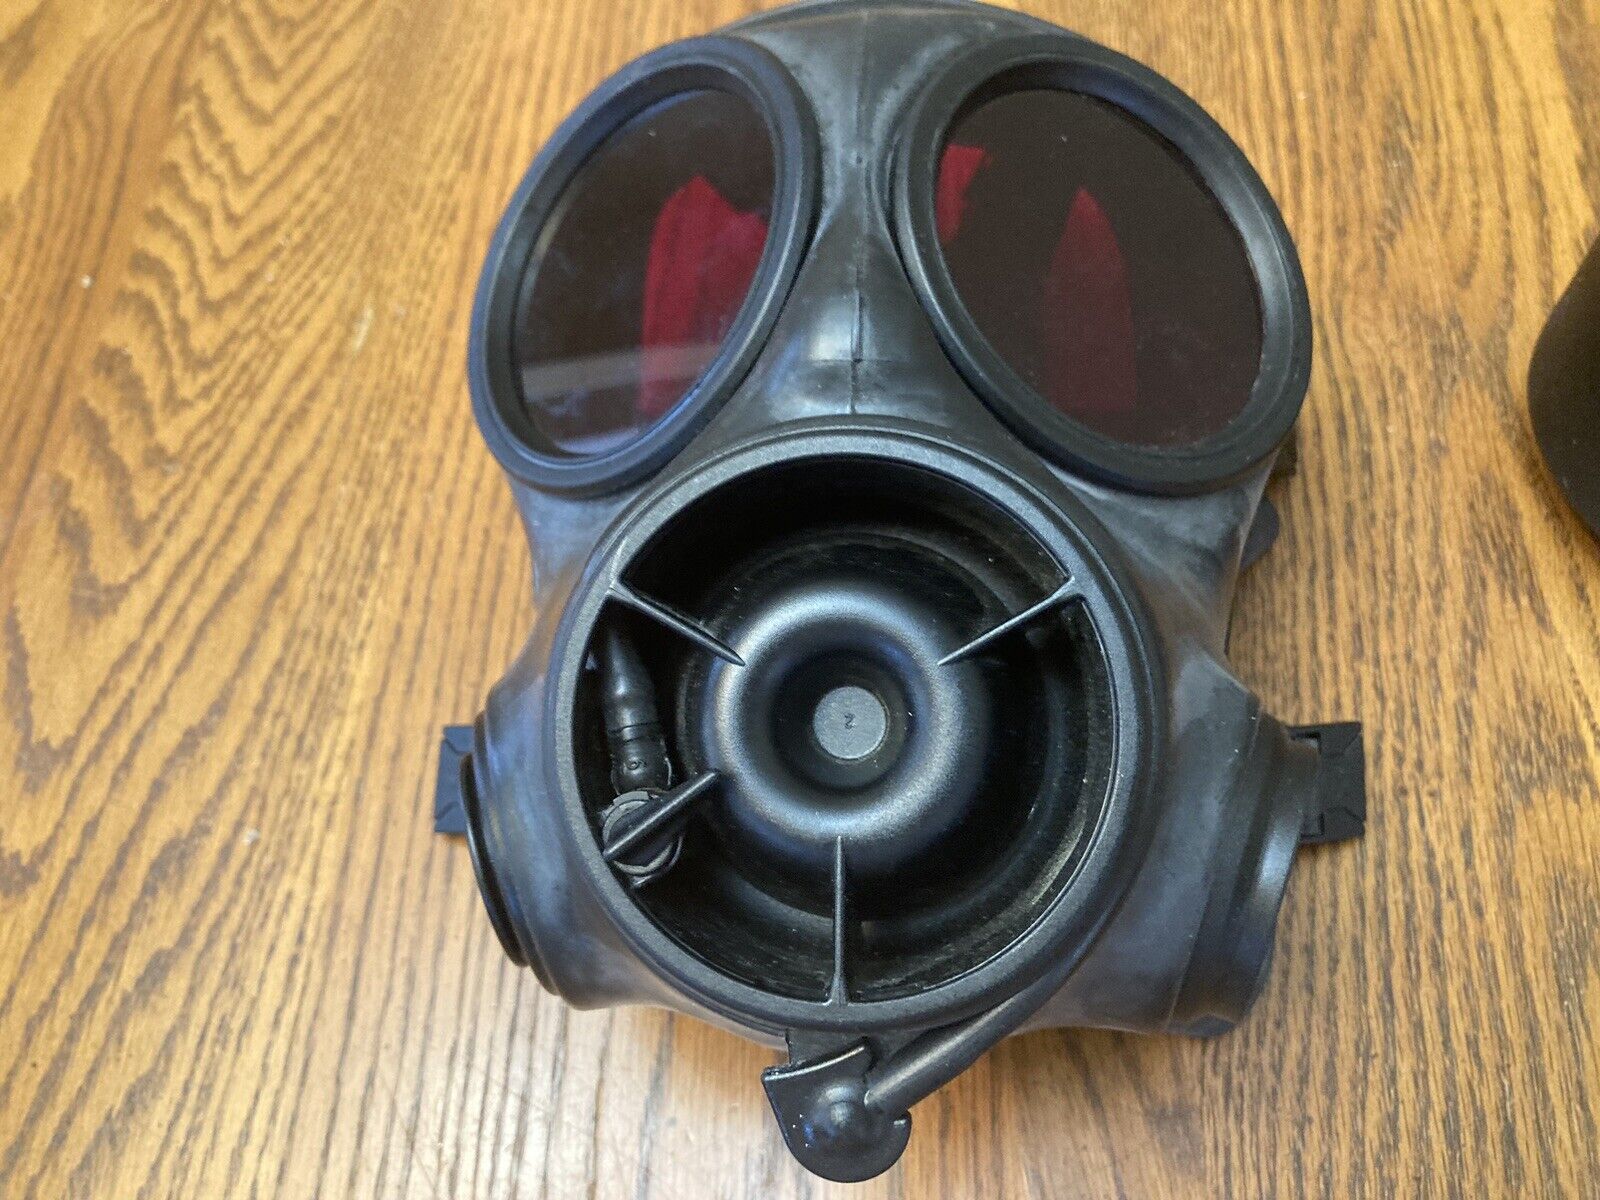 Rare 2008 S-10 Gas Mask Size 2